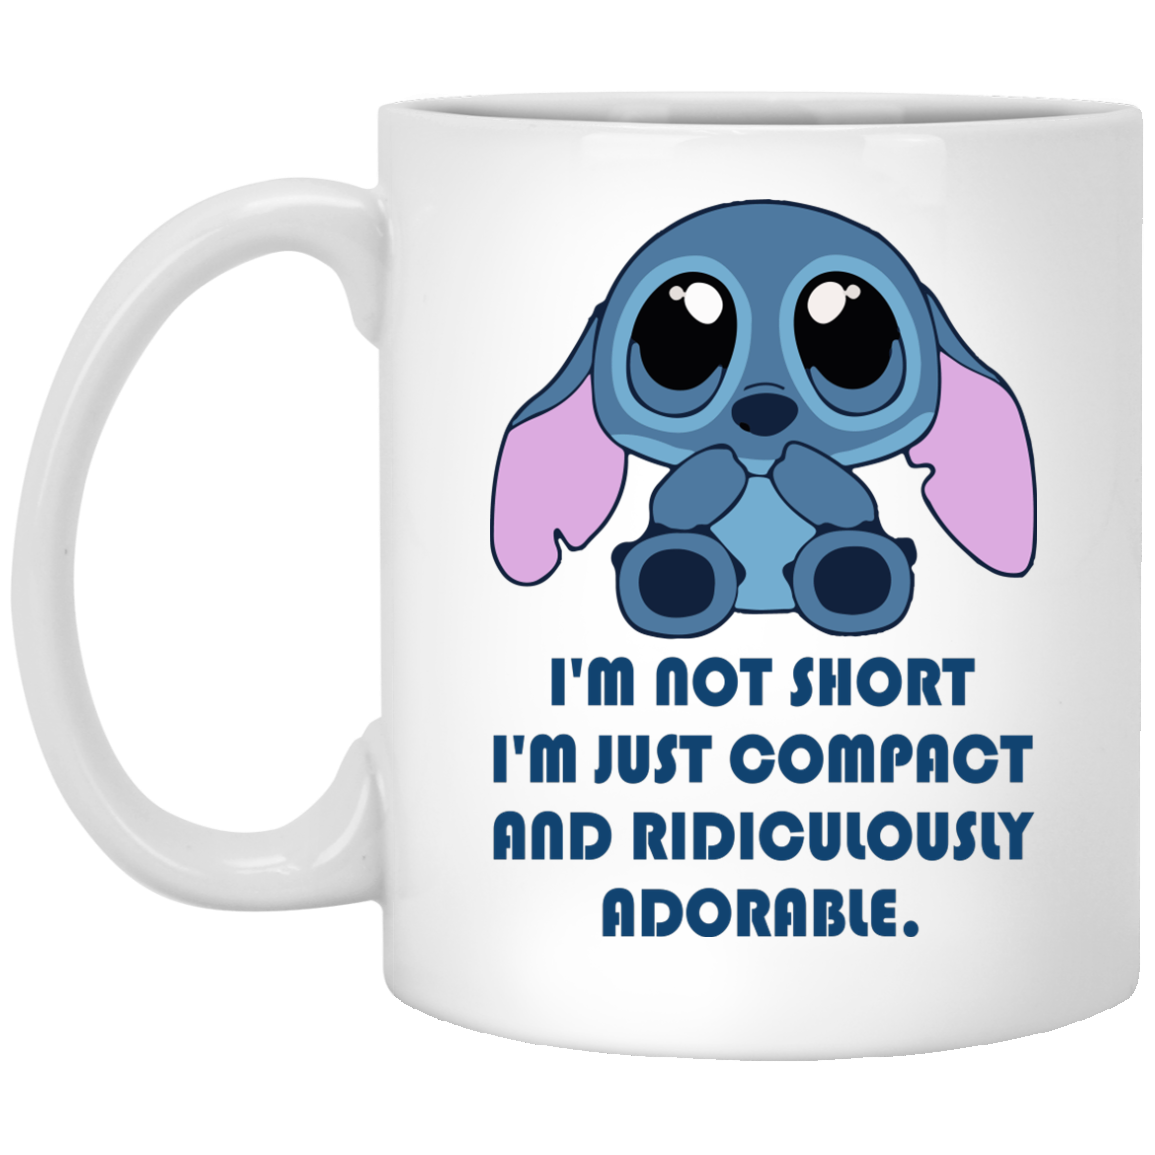 Stitch: I'm not short I'm just compact and ridiculously adorable mugs